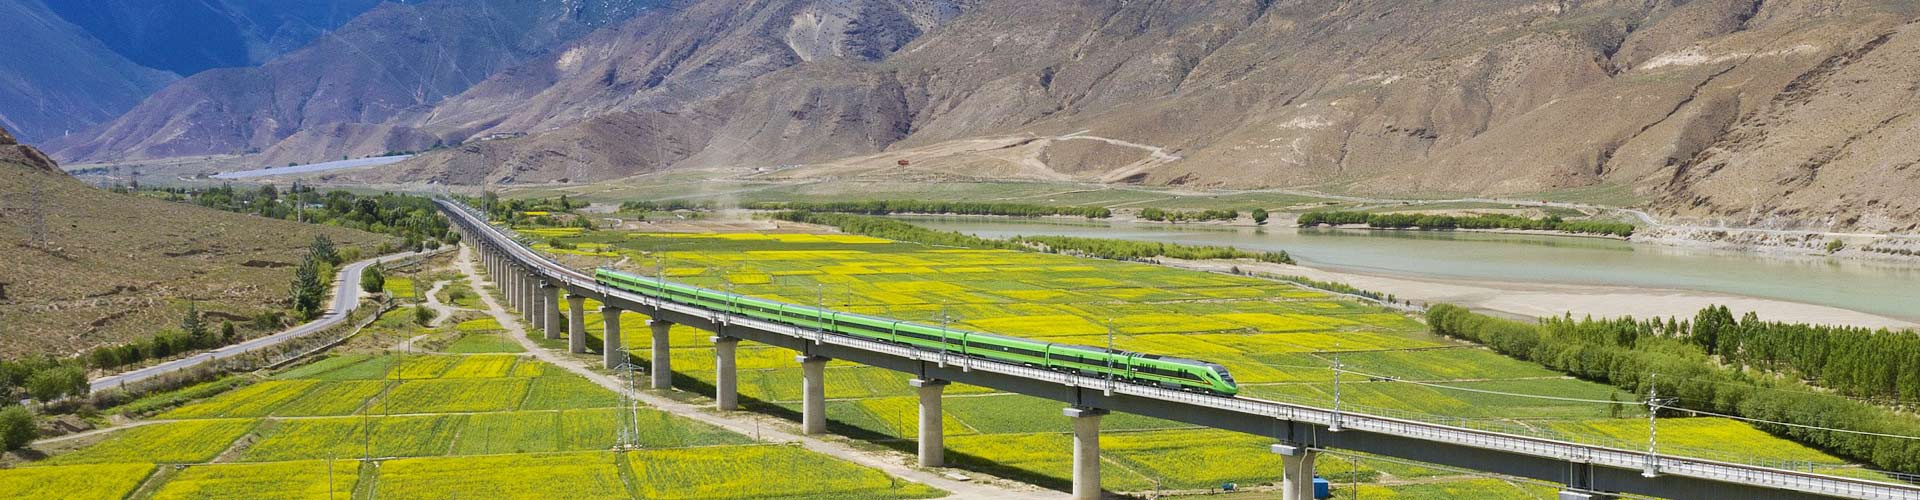 Get to the Tibetan Plateau by train. Join in Xining Tibet Tour to unvail the mysteries of the wonders on the roof of the world via Qinghai-Tibet Railway. 